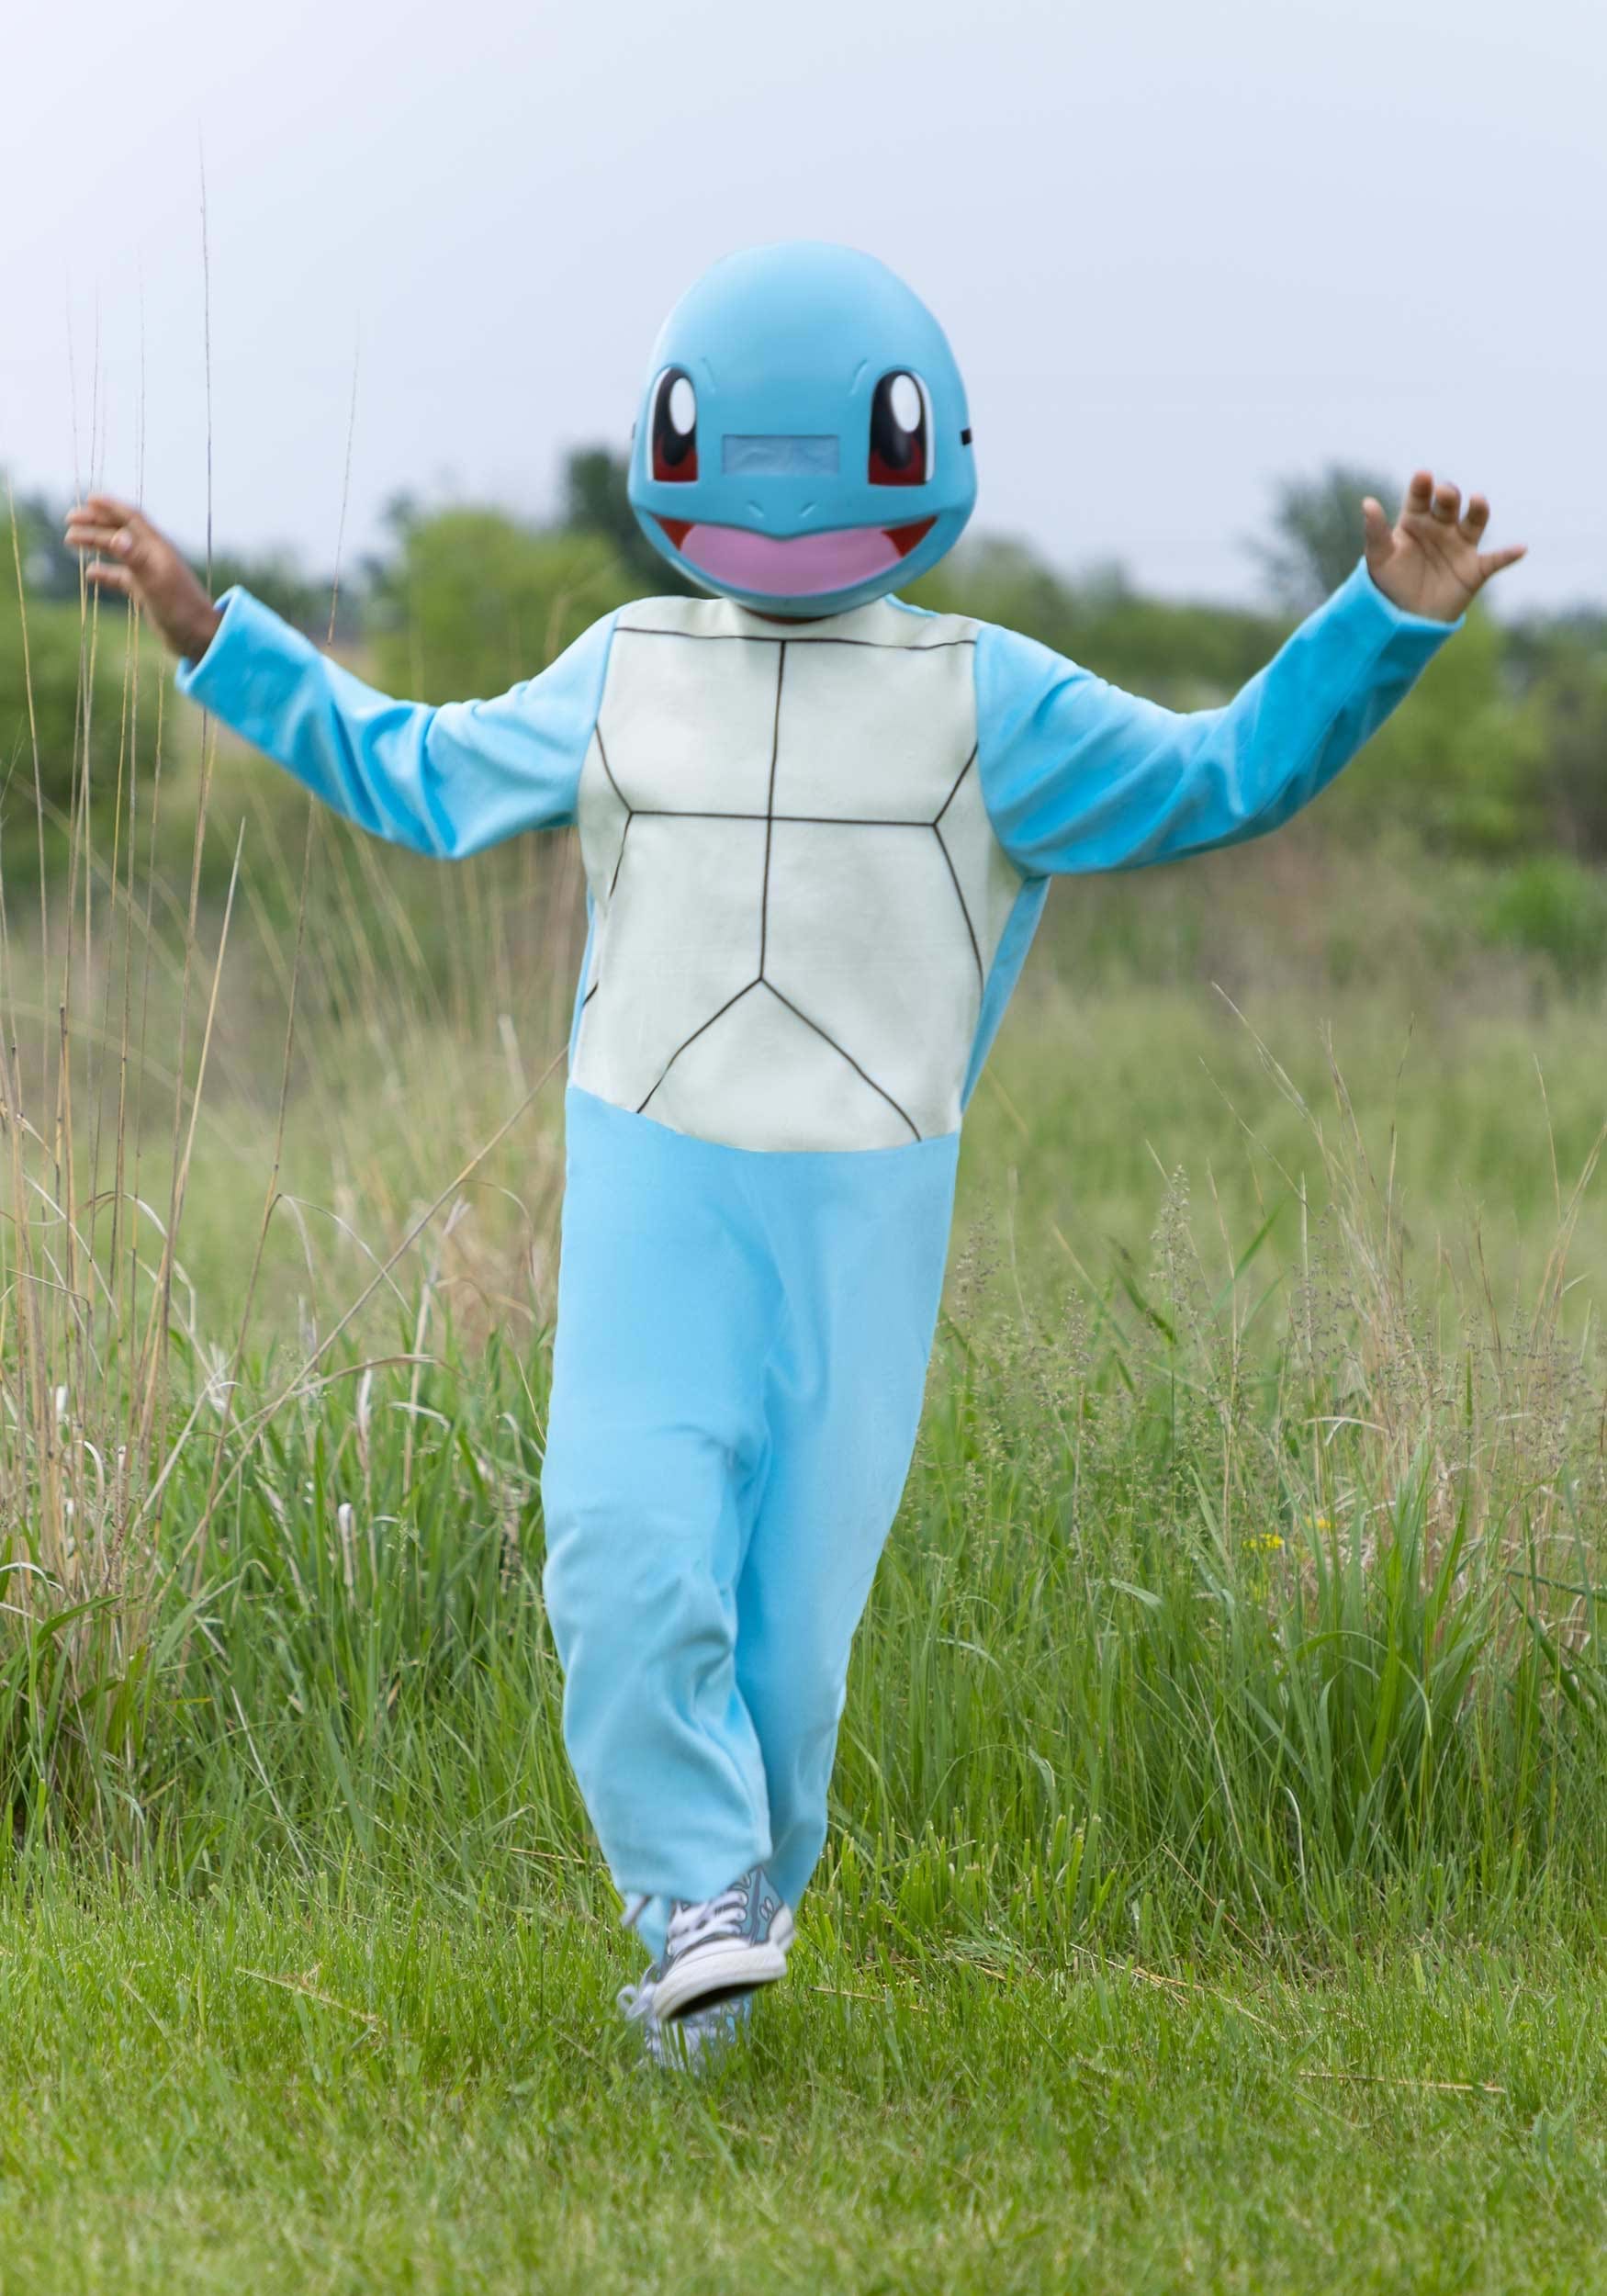 Pokémon Classic Squirtle Costume For Kids